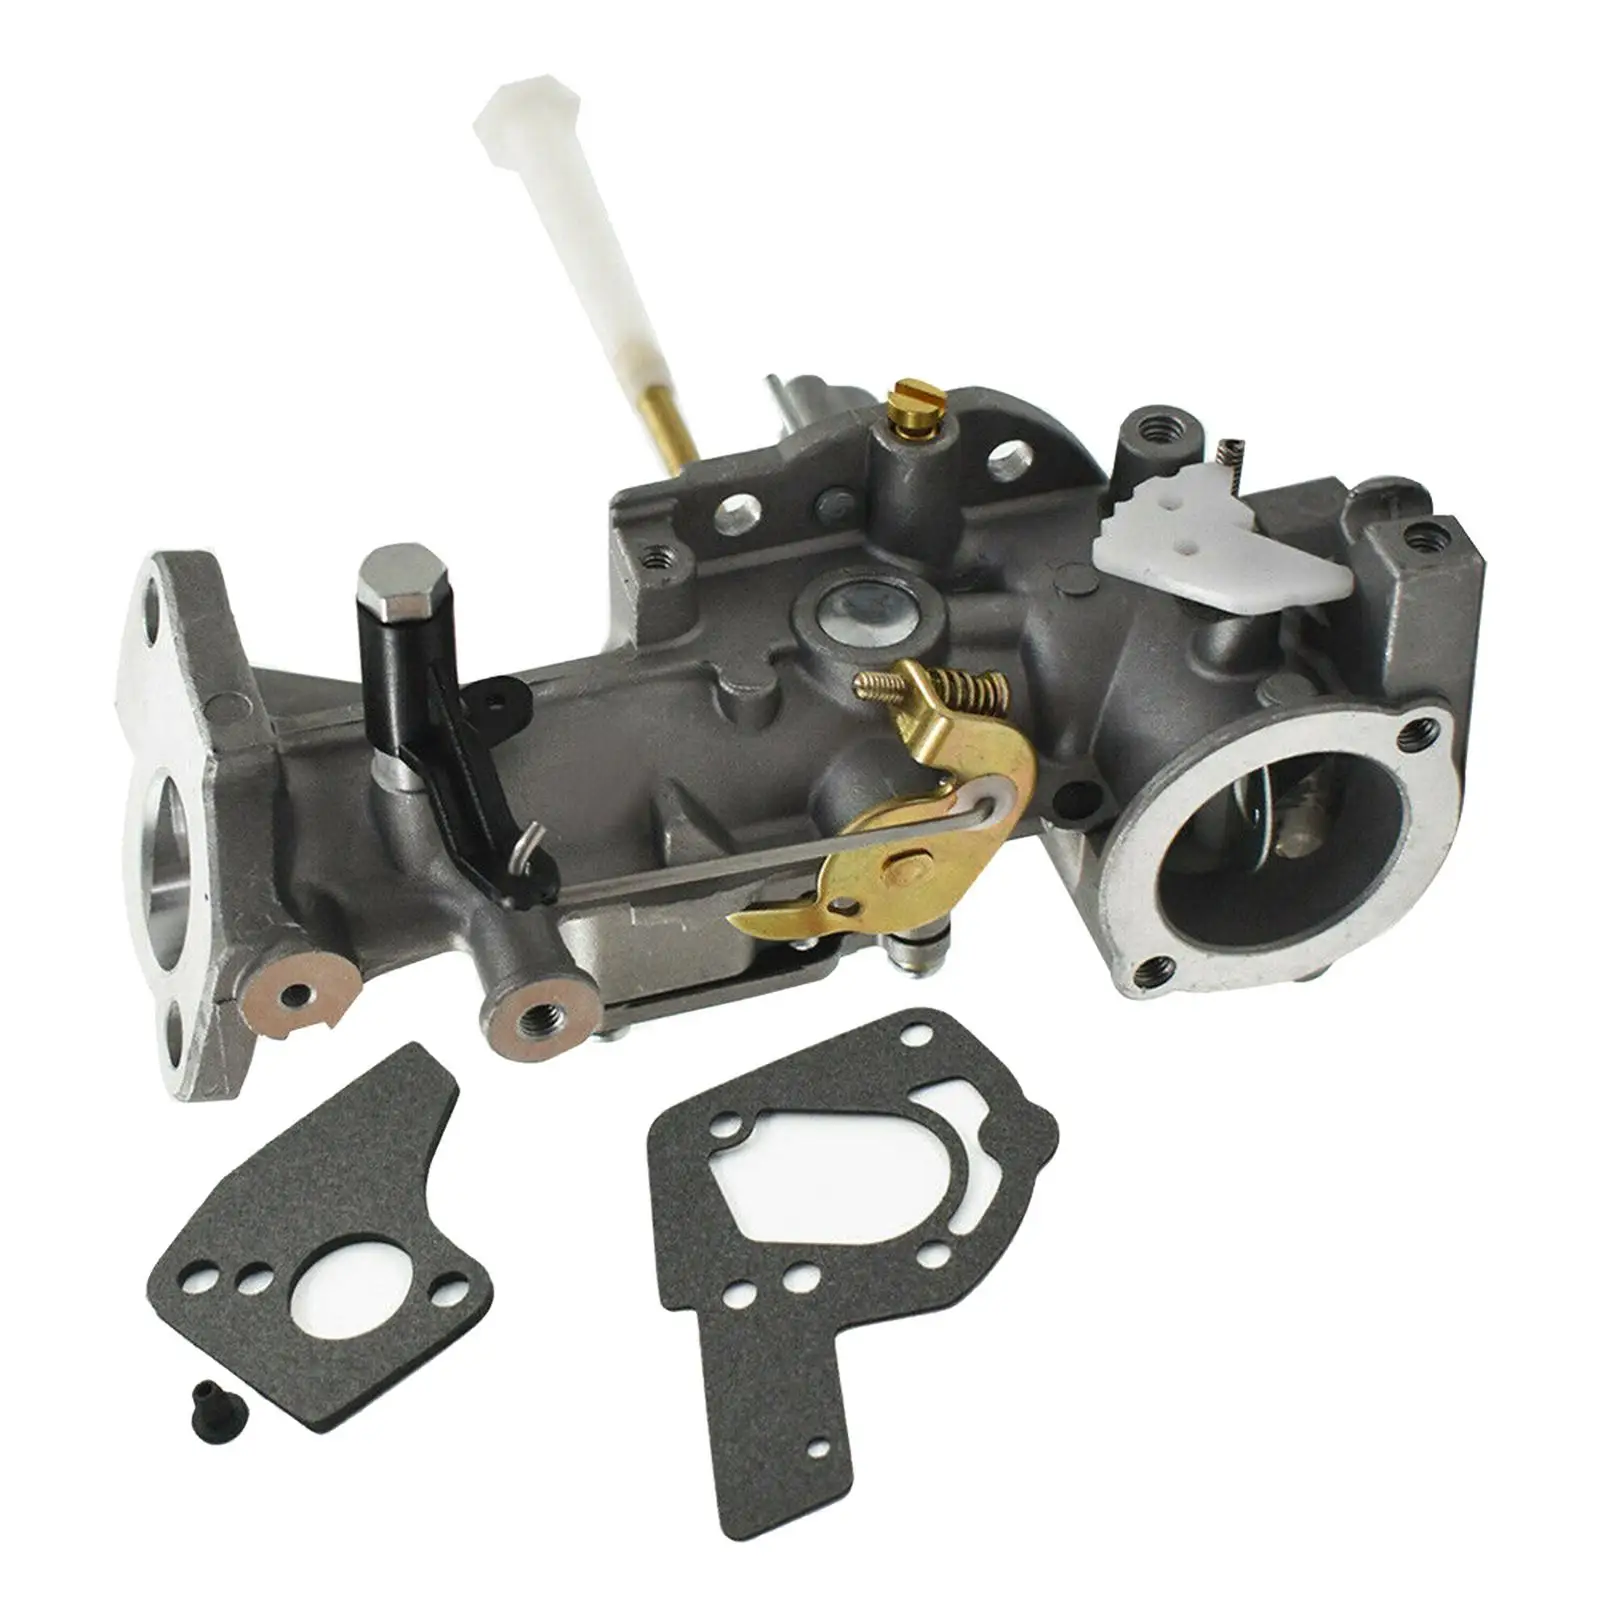 1pc Carburetor W/ 2 Gaskets Fit for B&S 1332Hp Replacement Lawn Mower